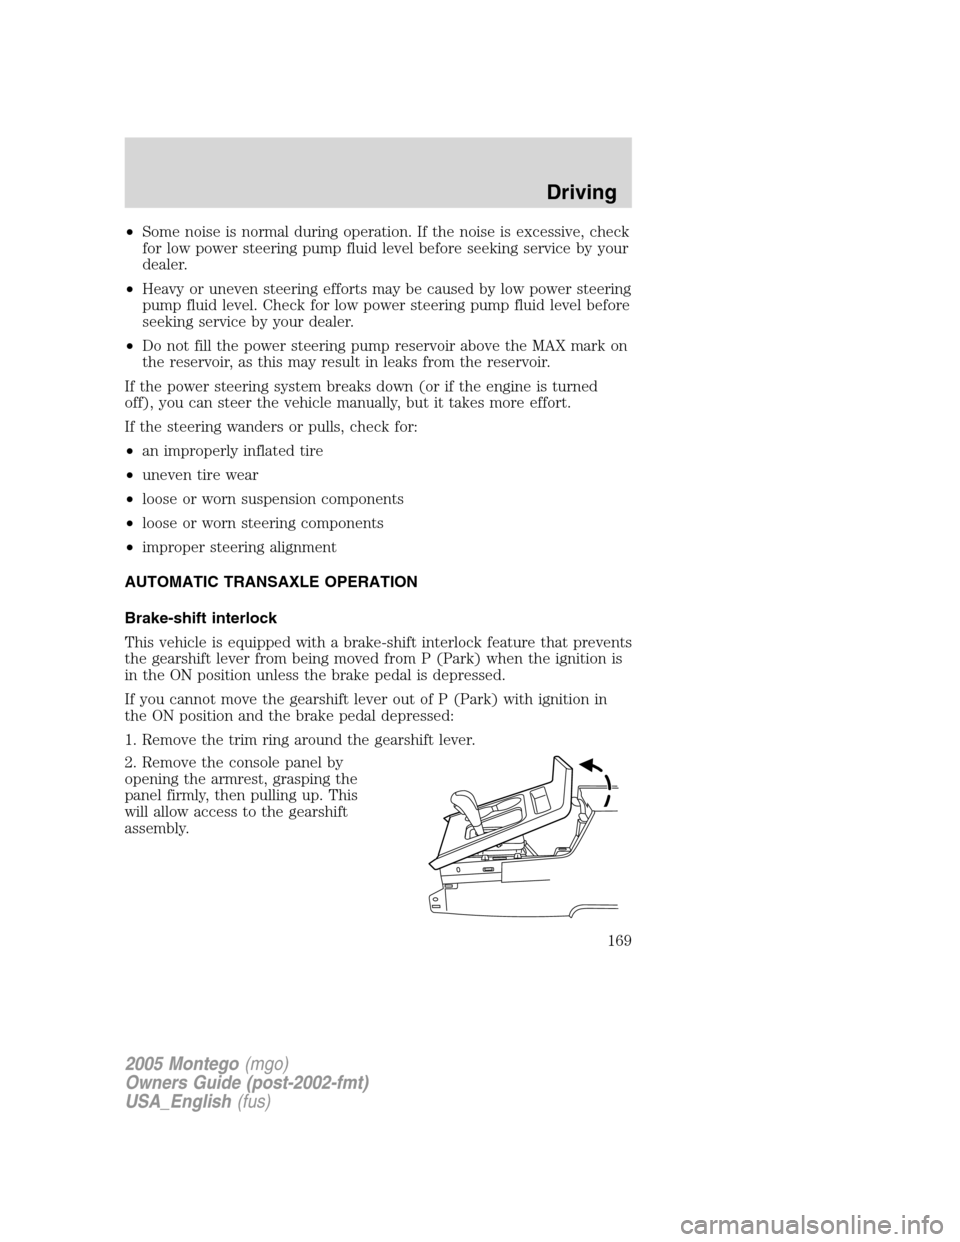 Mercury Montego 2005  Owners Manuals •Some noise is normal during operation. If the noise is excessive, check
for low power steering pump fluid level before seeking service by your
dealer.
•Heavy or uneven steering efforts may be cau